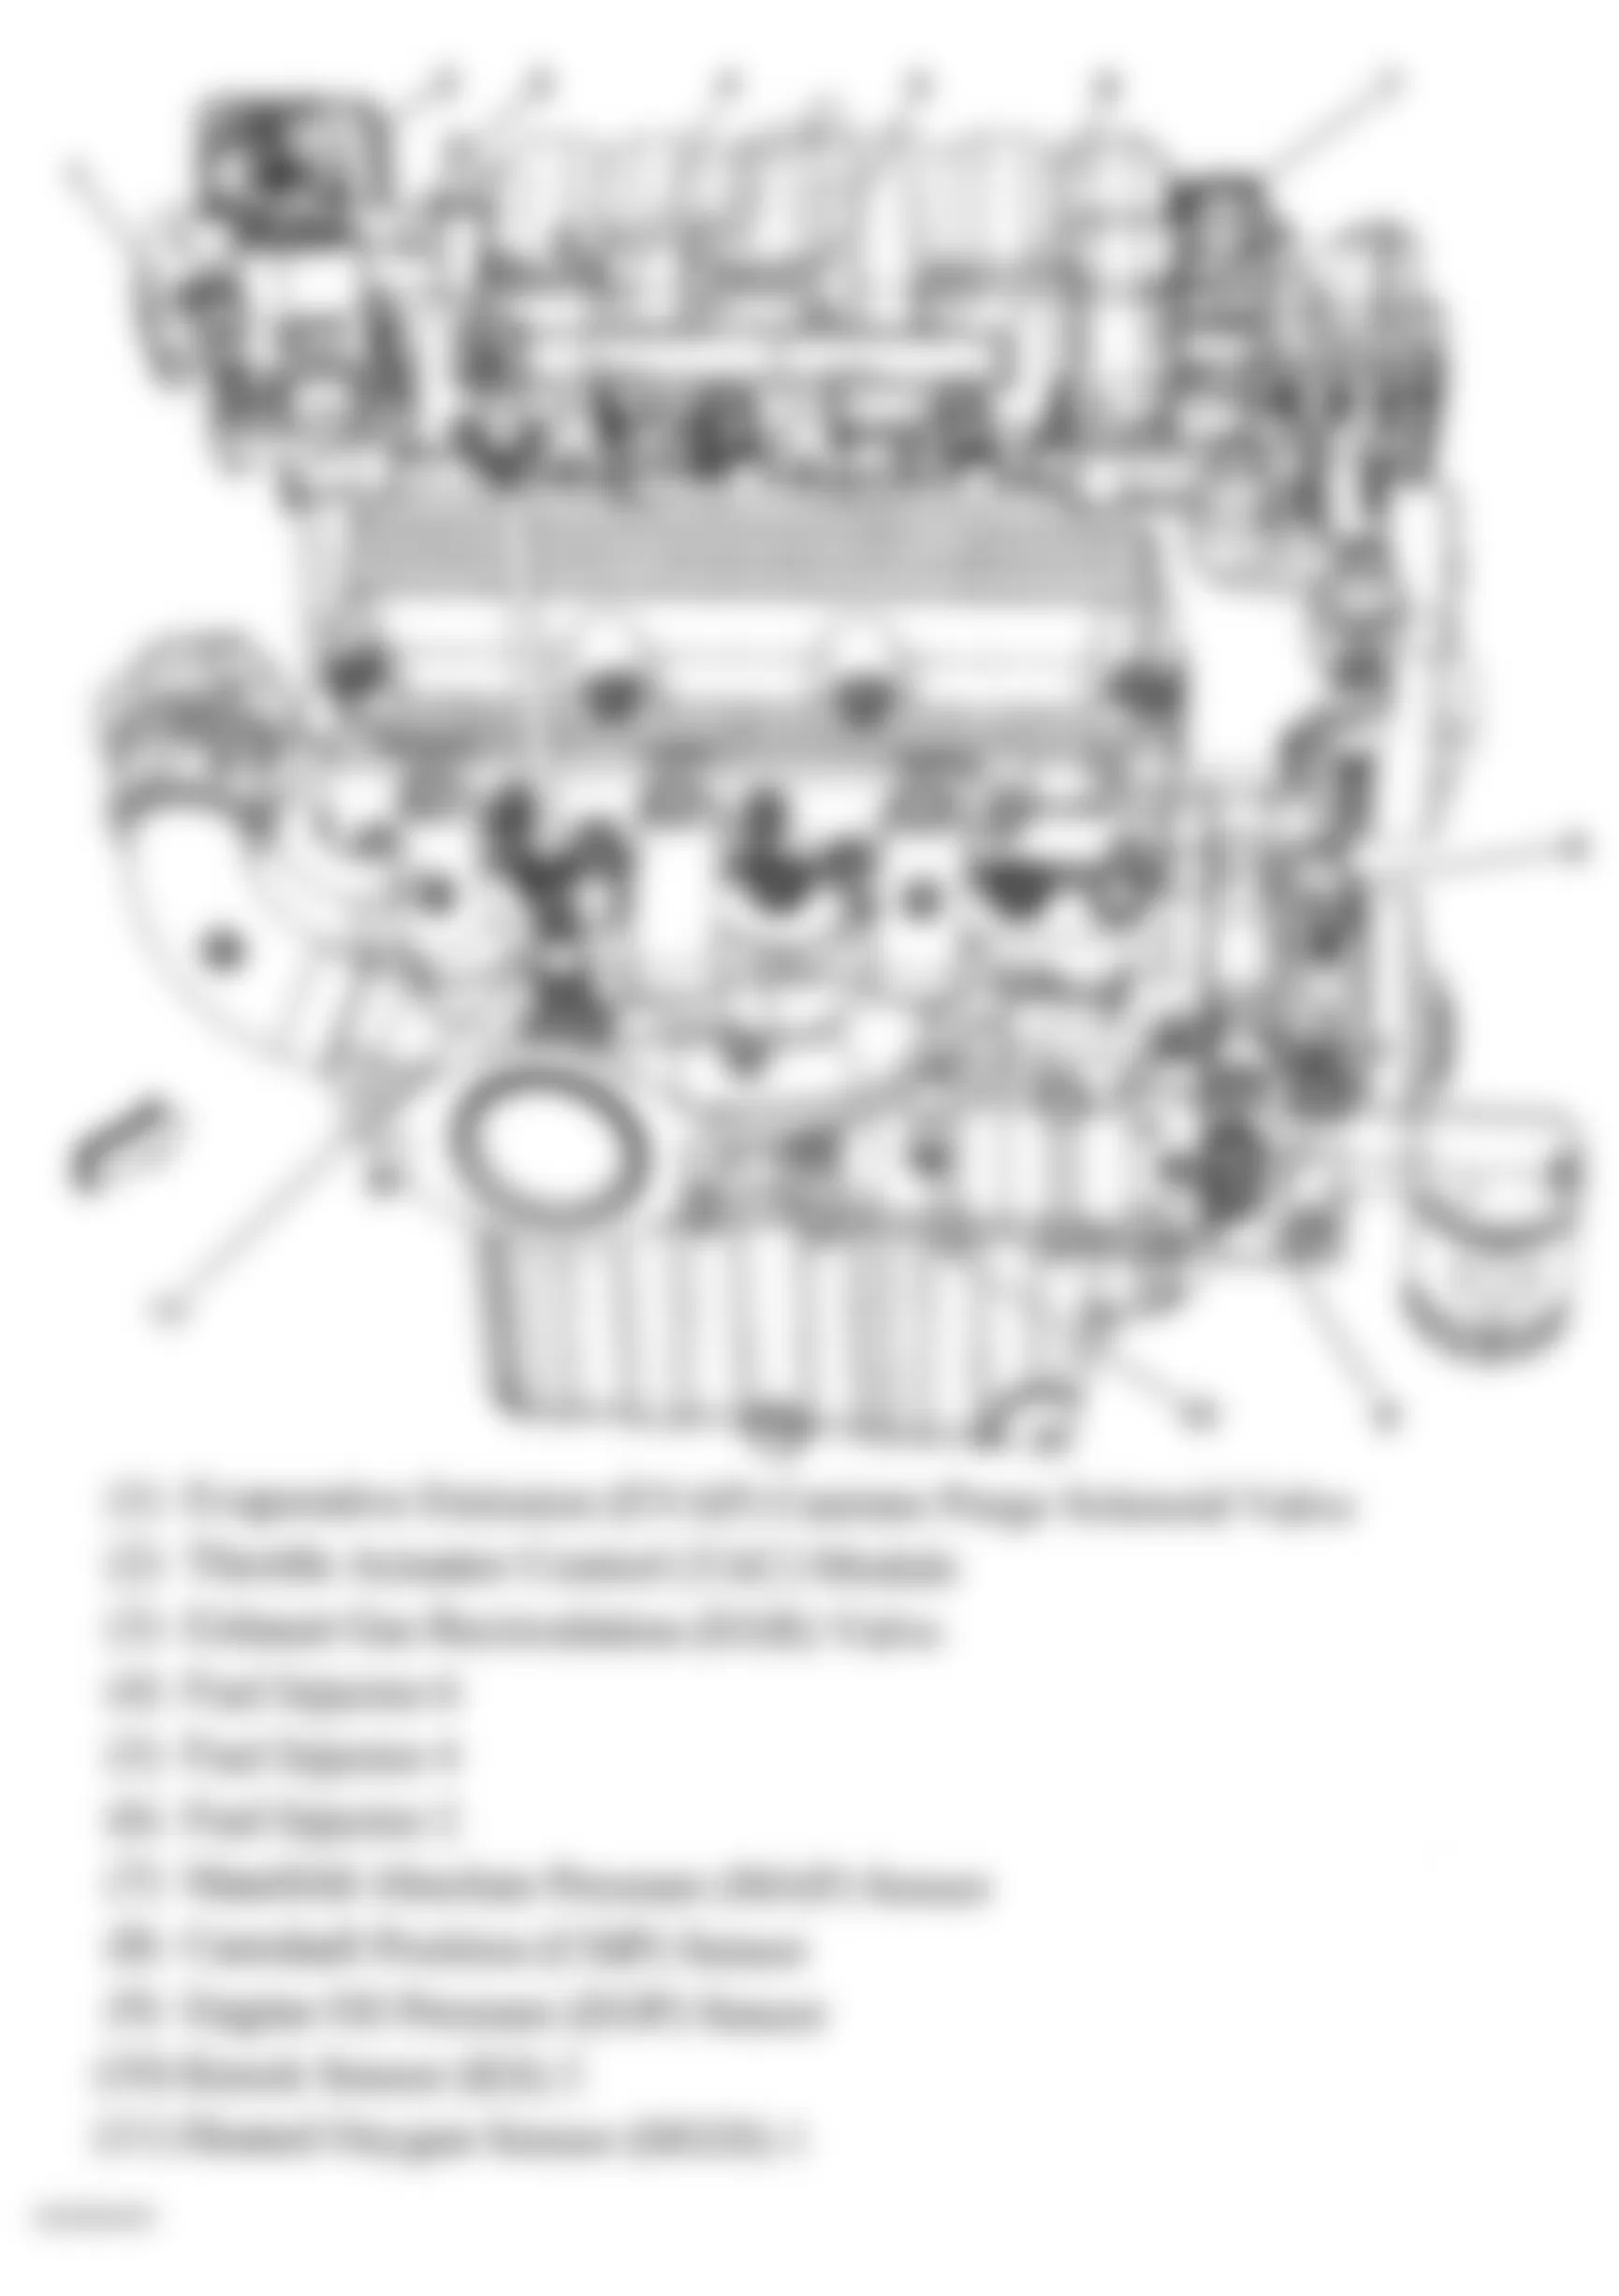 Buick Allure CX 2005 - Component Locations -  Right Side Of Engine (3.8L)